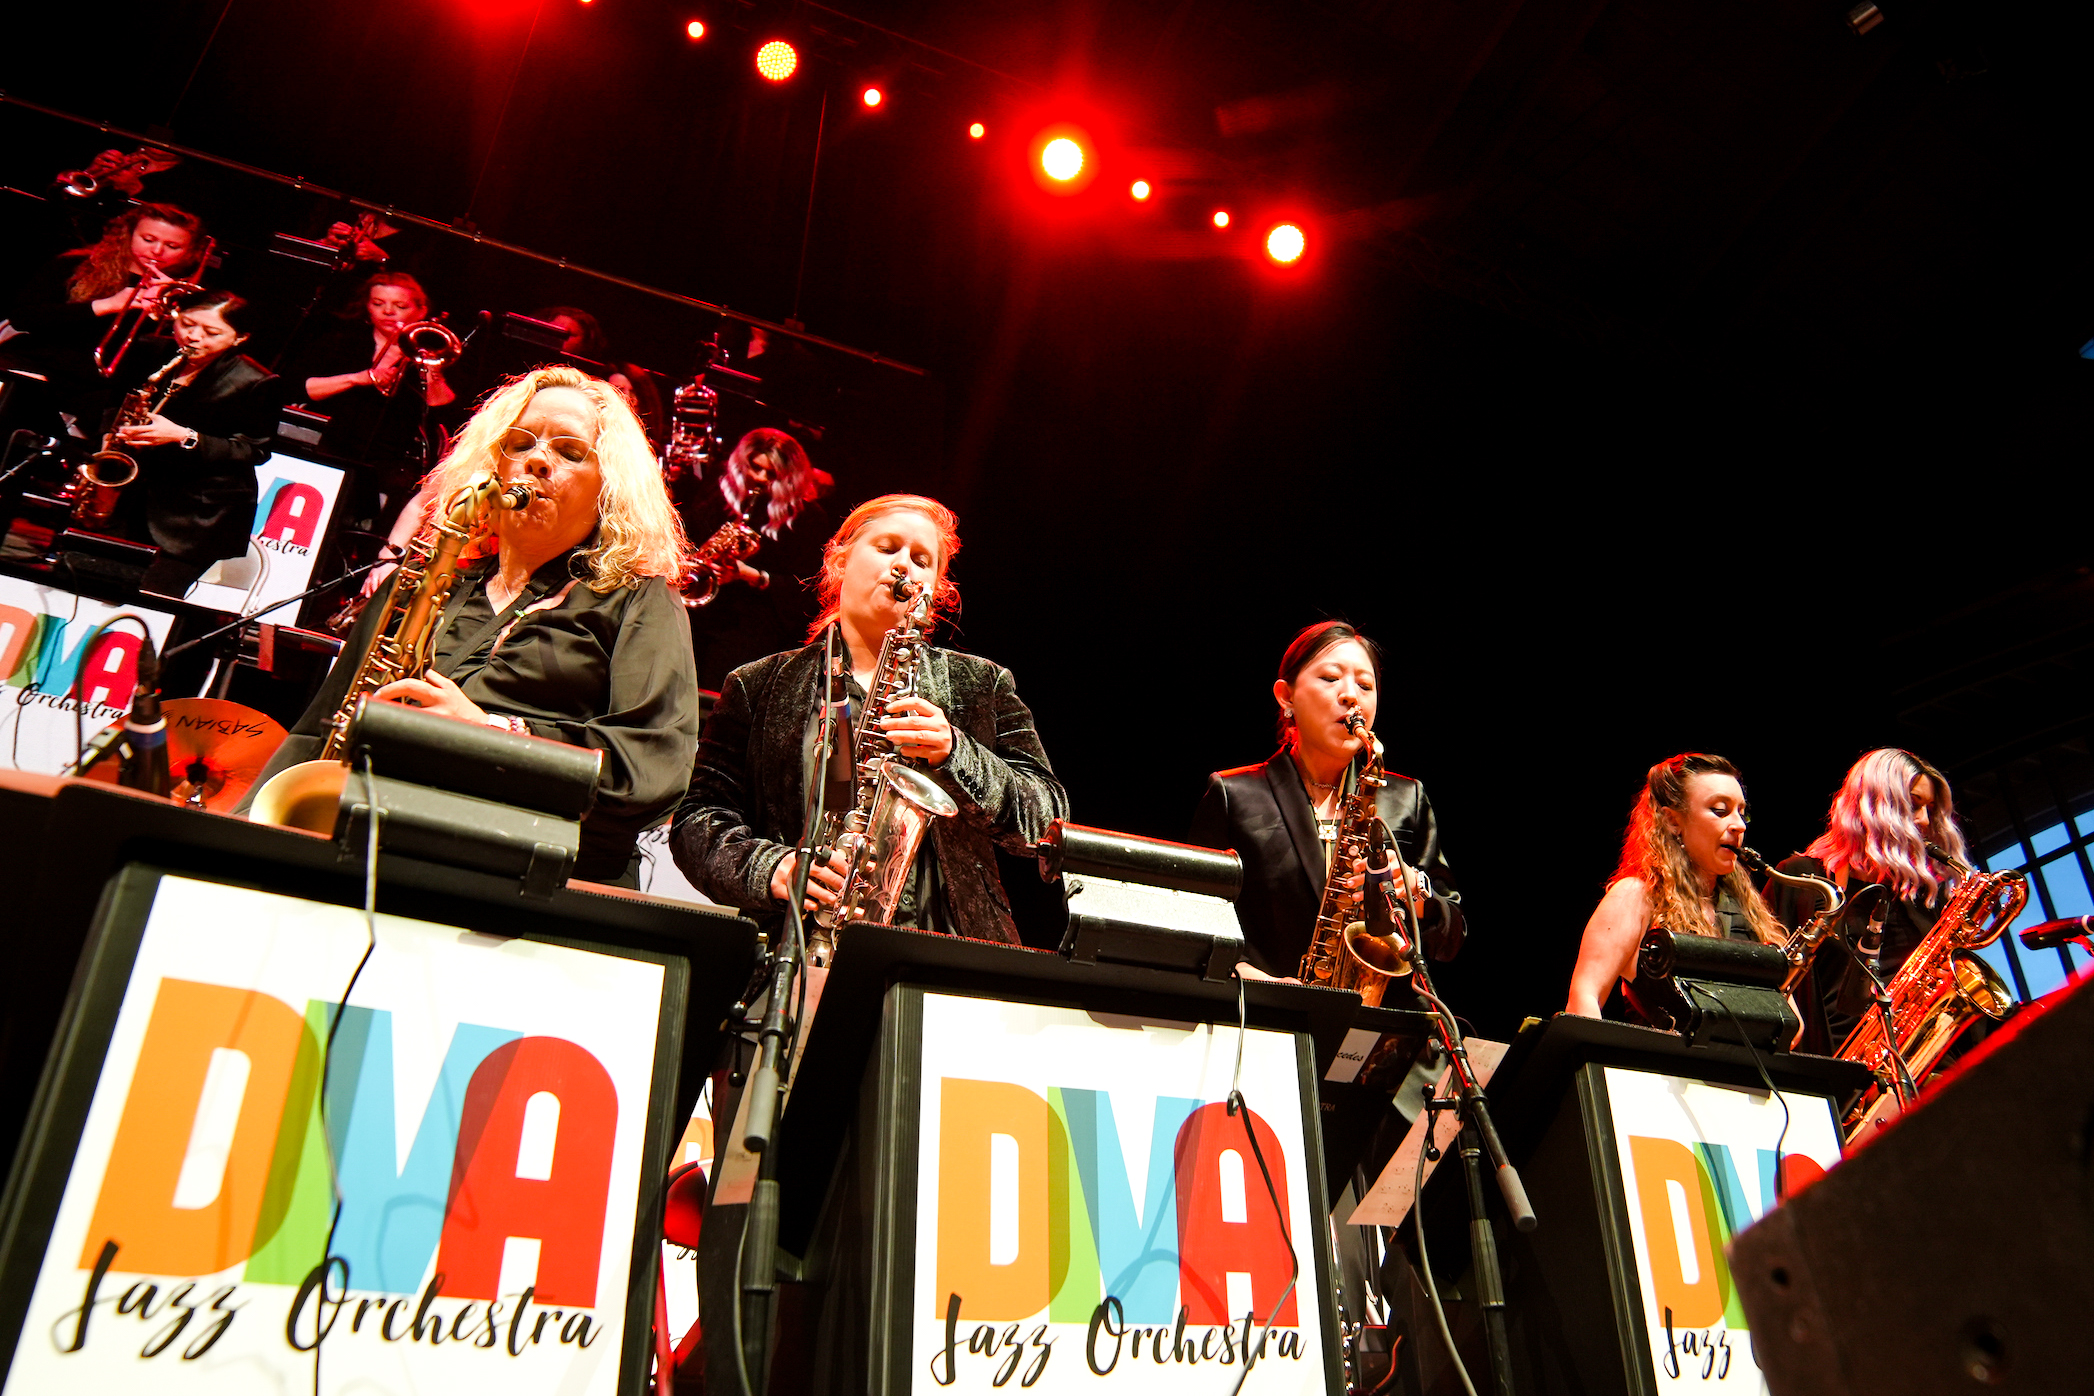 The DIVA Jazz Orchestra performers stand under red lights behind podiums with the bright yellow, green, blue and red title letters of their group emblazoned on the front. The lead performers are a group of women all wearing black tops and playing jazz band instruments.